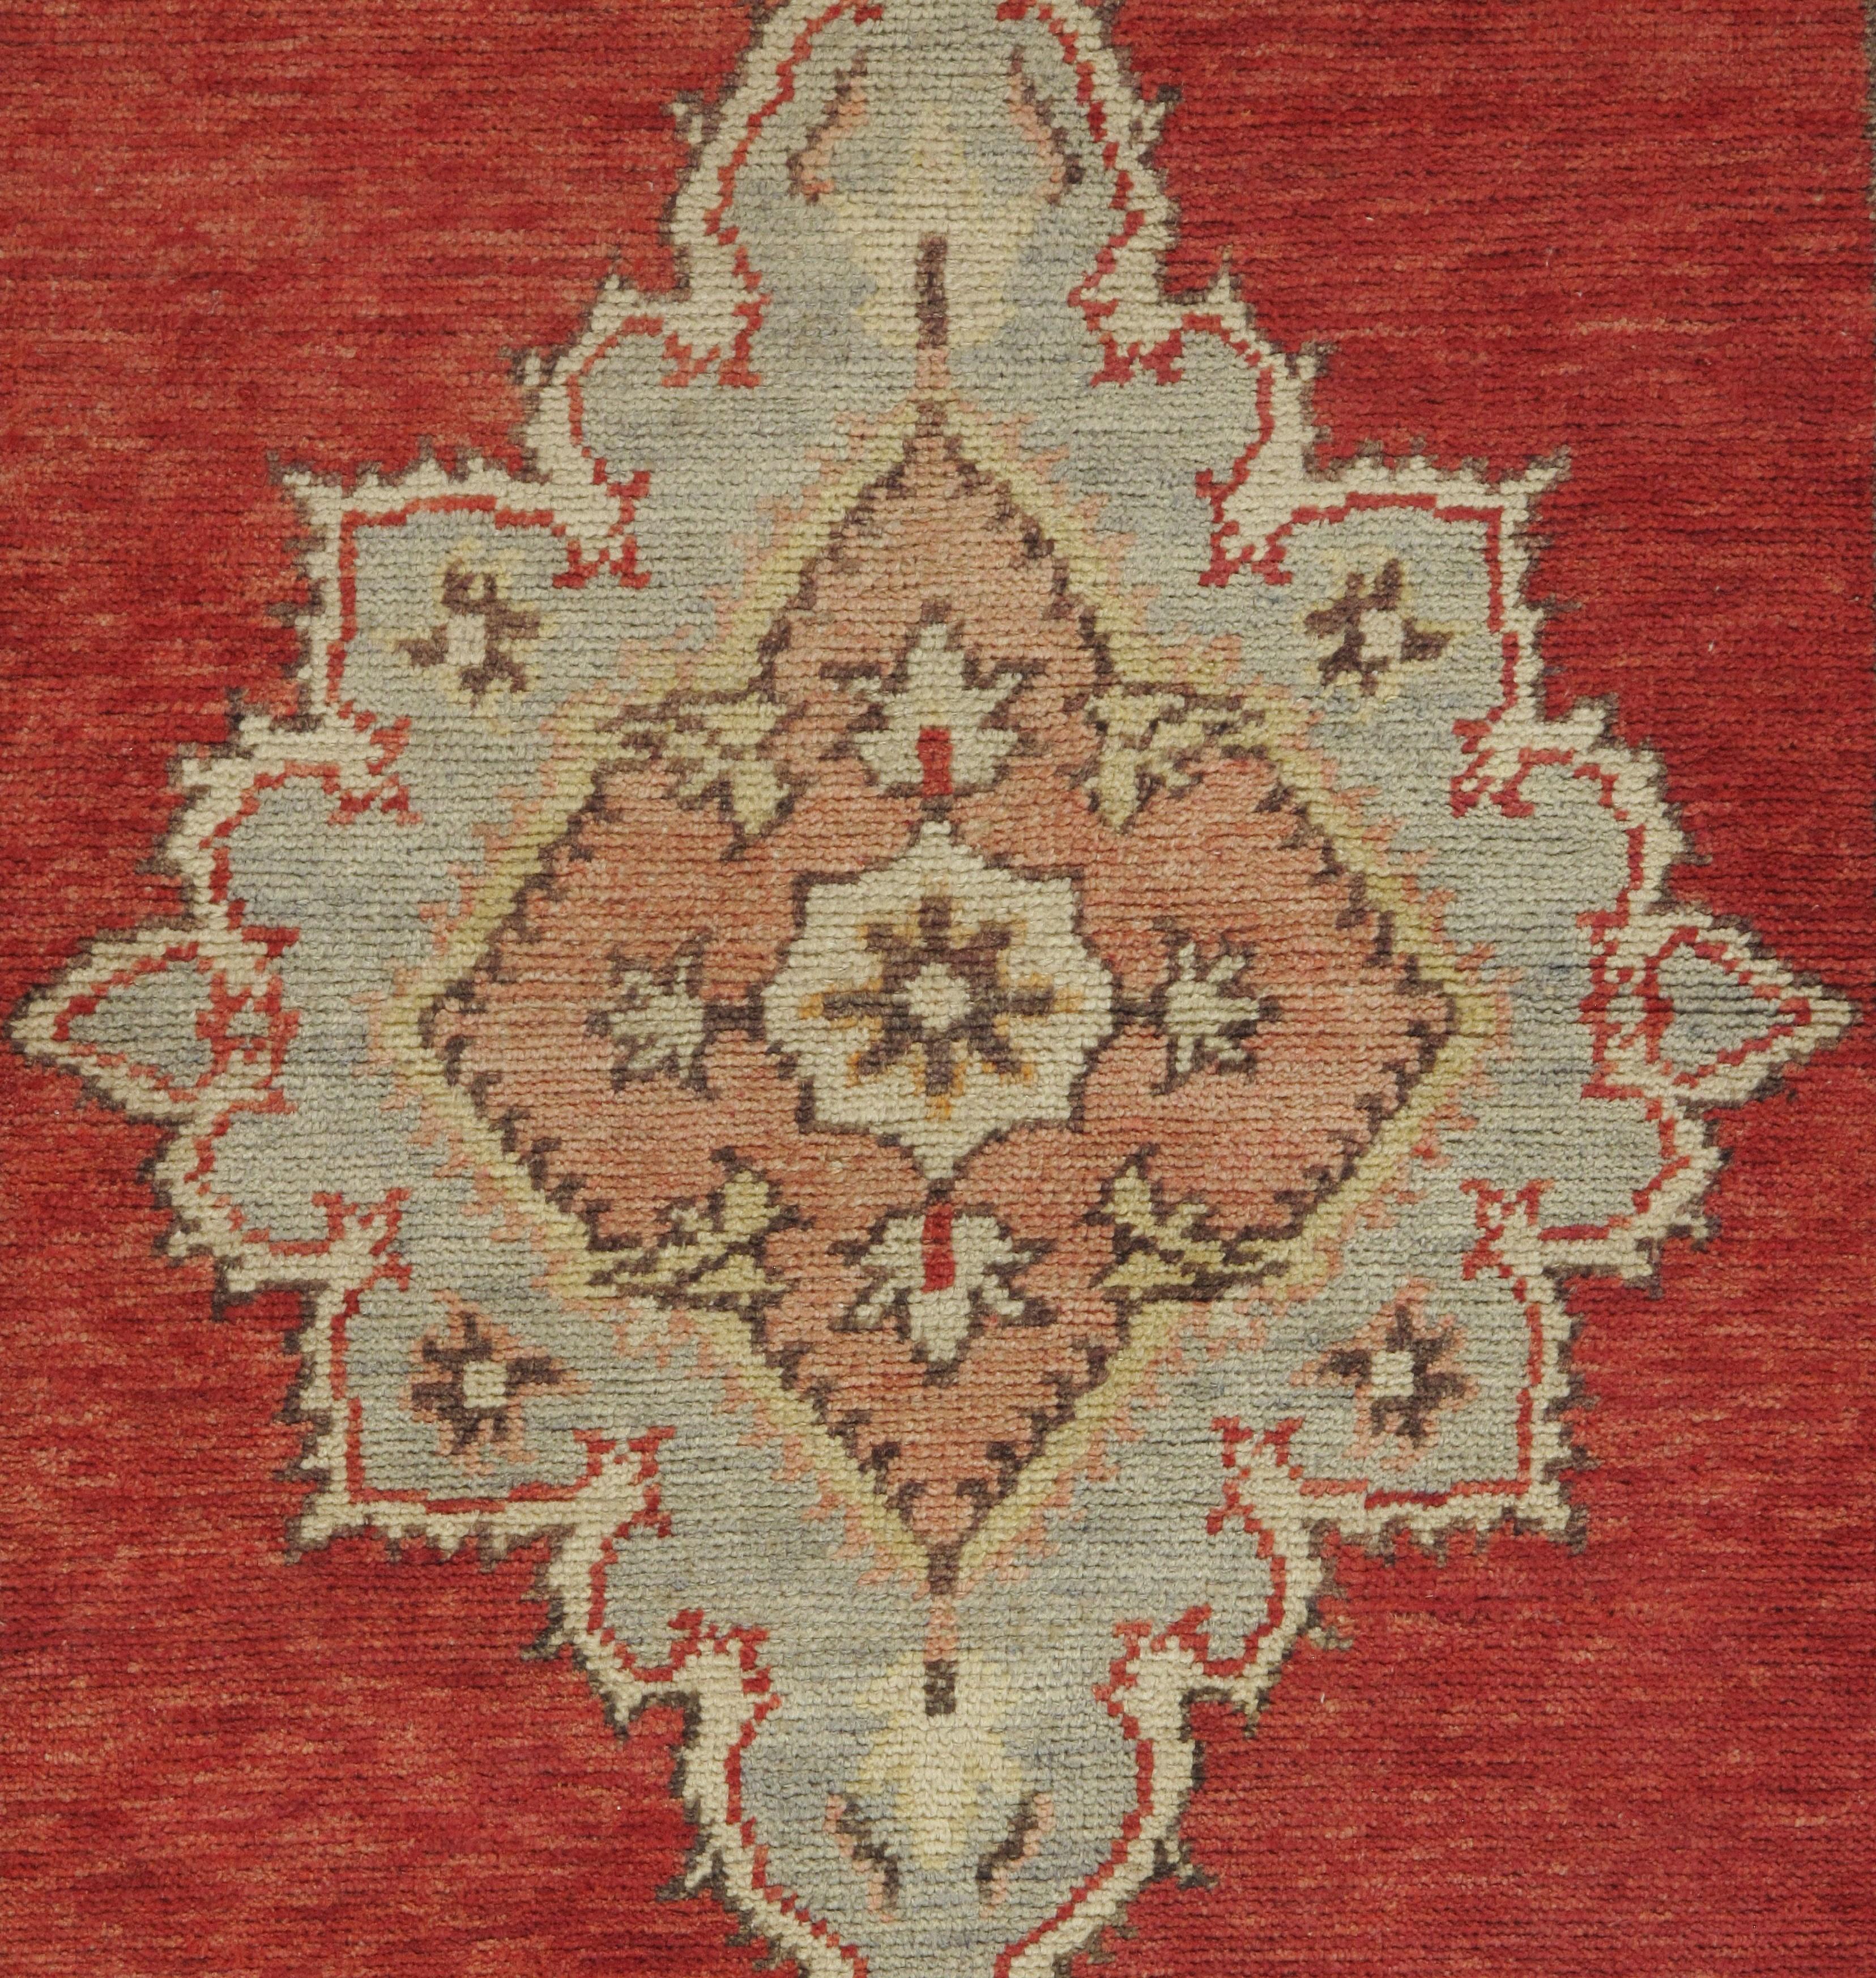 Vintage Turkish Oushak rug runner, circa 1940. Handwoven in Turkey where rug weaving is the culture rather than a business. Rugs from Turkey are known for the high quality of their wool their beautiful patterns and warm colors. These designer